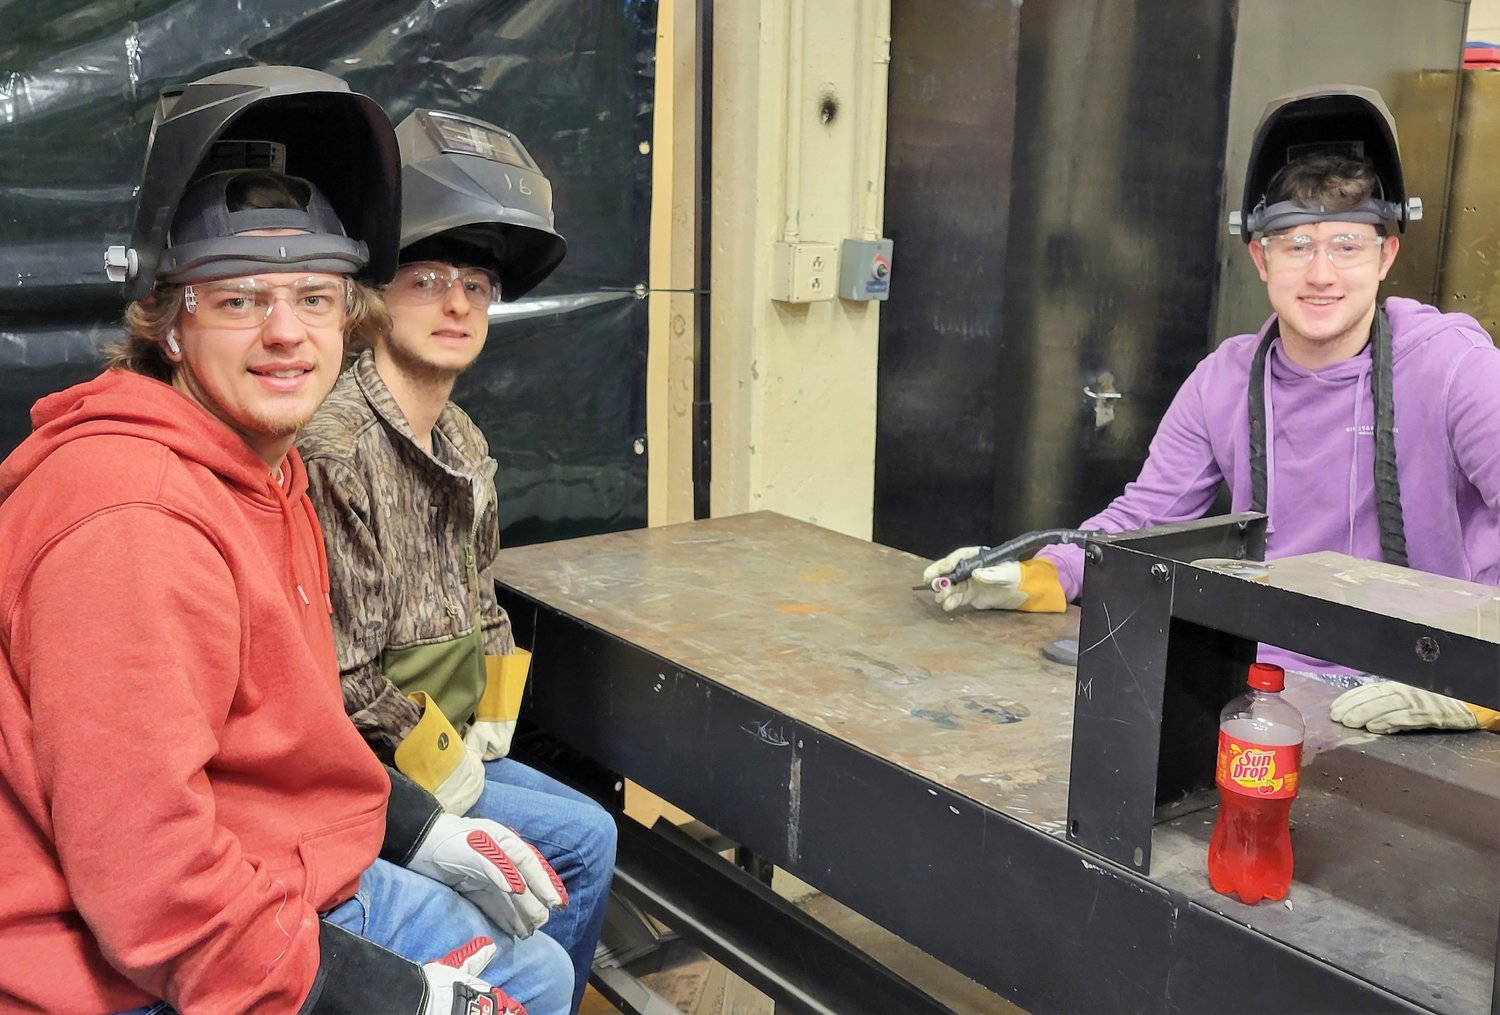 Welding manufacturing students in Ronnie Hudson’s class. The class lasts about 45 minutes and takes place at
the Shelbyville Central High CTE Annex